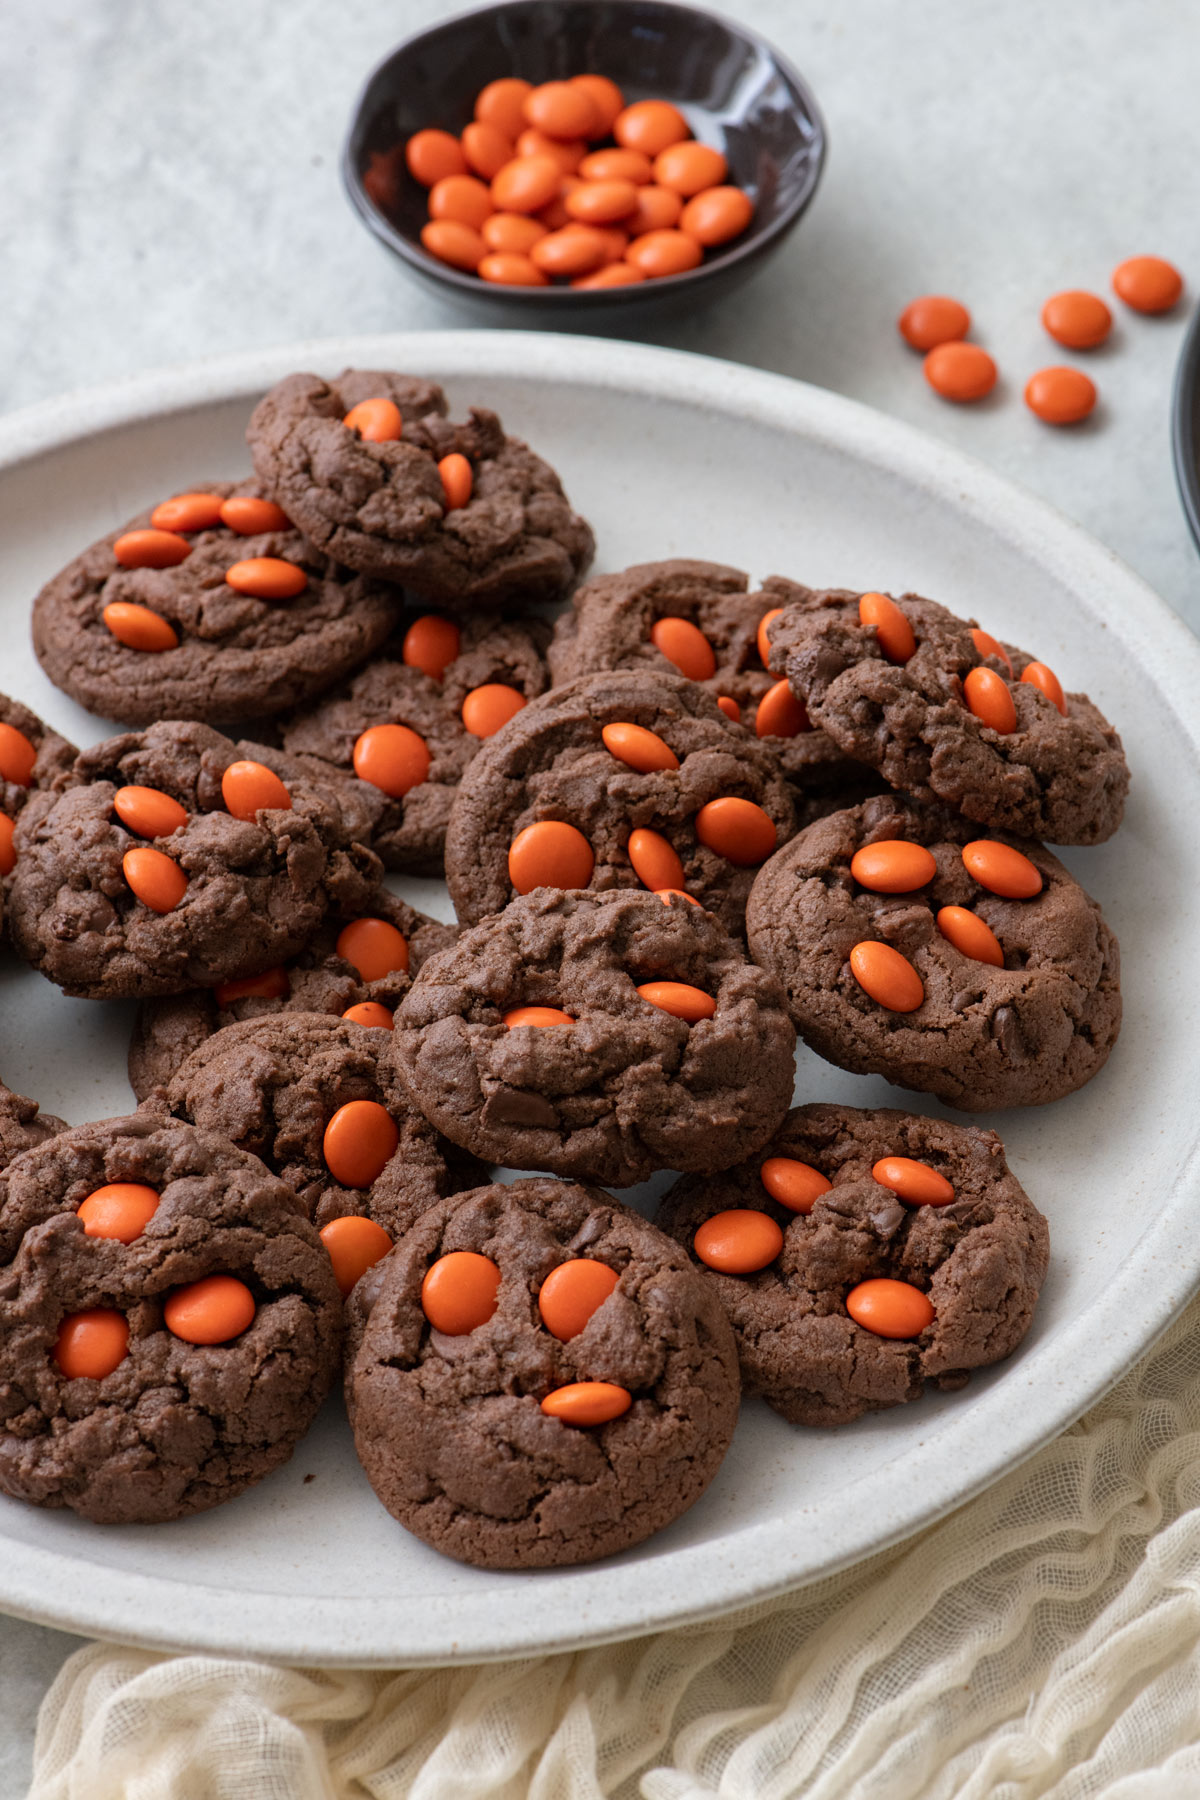 Large white plate with dark chocolate cookies with orange candies and small pumpkins nearby.